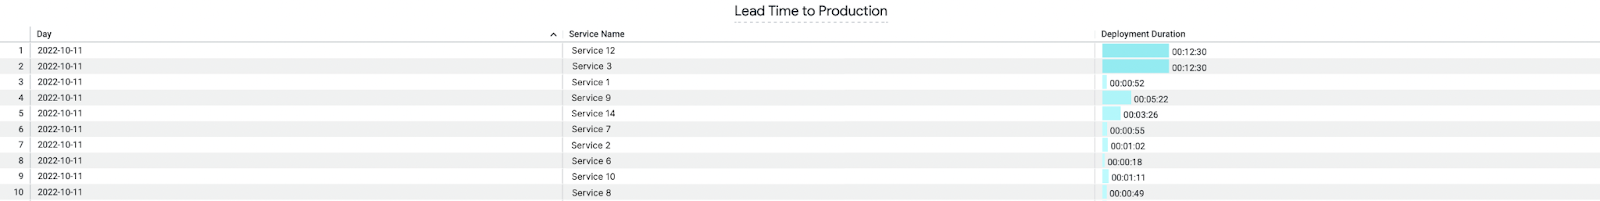 Example lead time to production chart